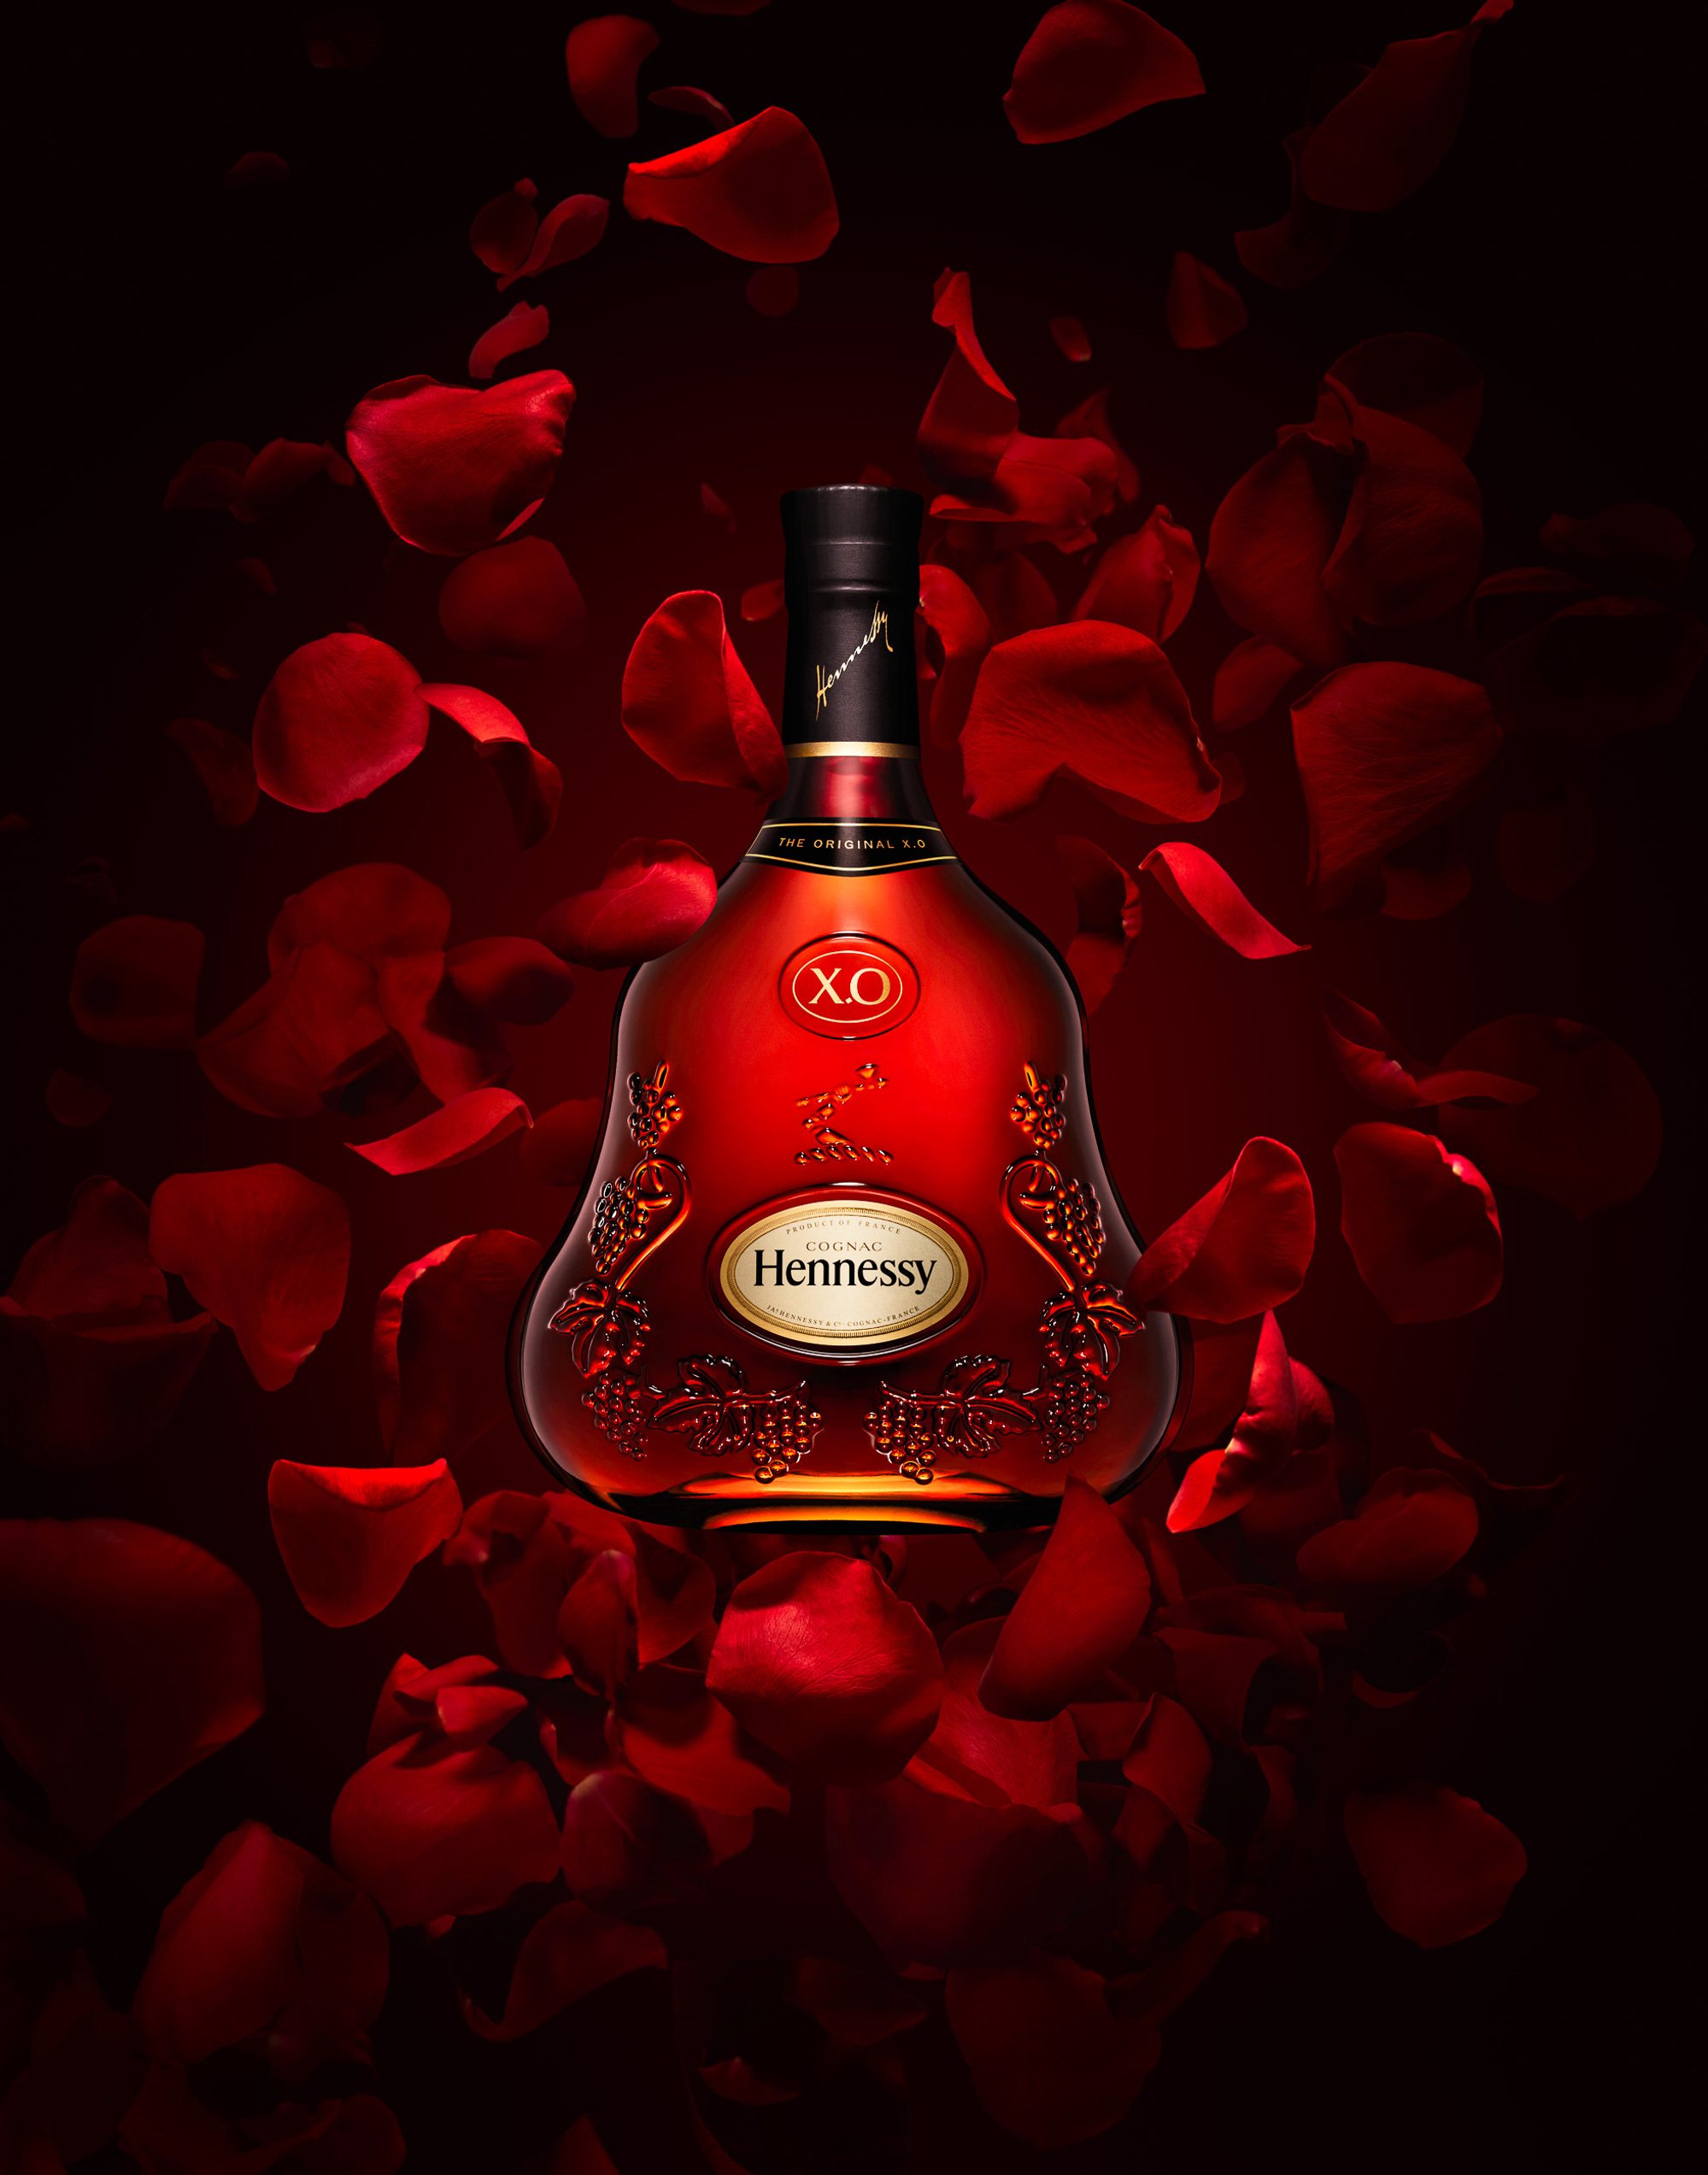 Bottle of Hennessy XO Cognac on deep red background with floating rose petals photographed by Timothy Hogan. 